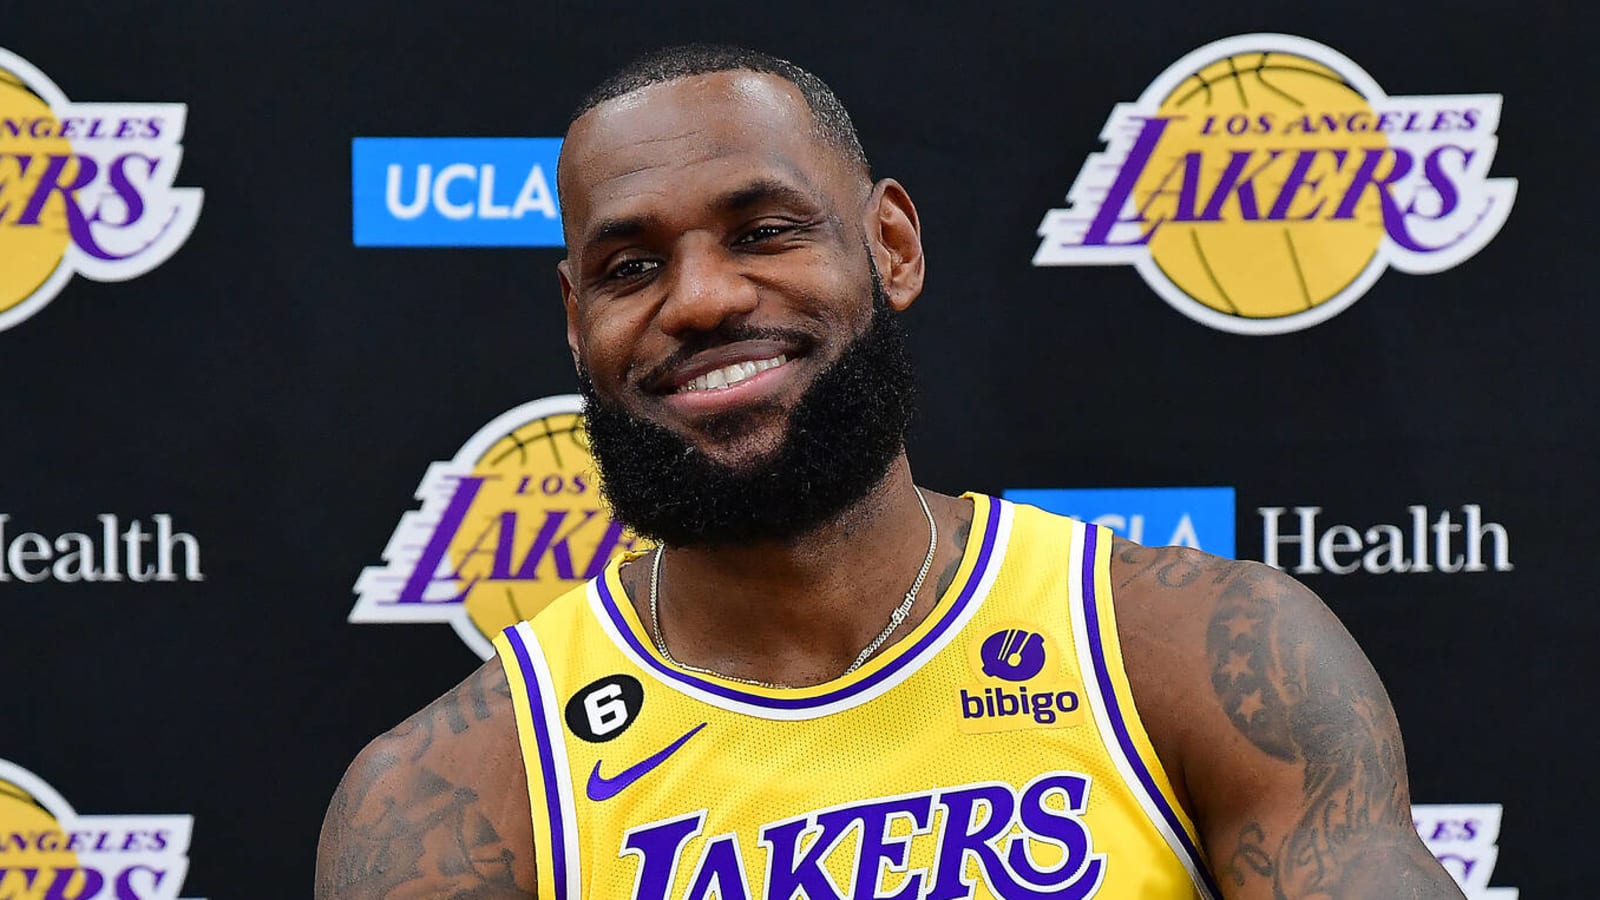 LeBron James leads group of NBA stars investing in pickleball